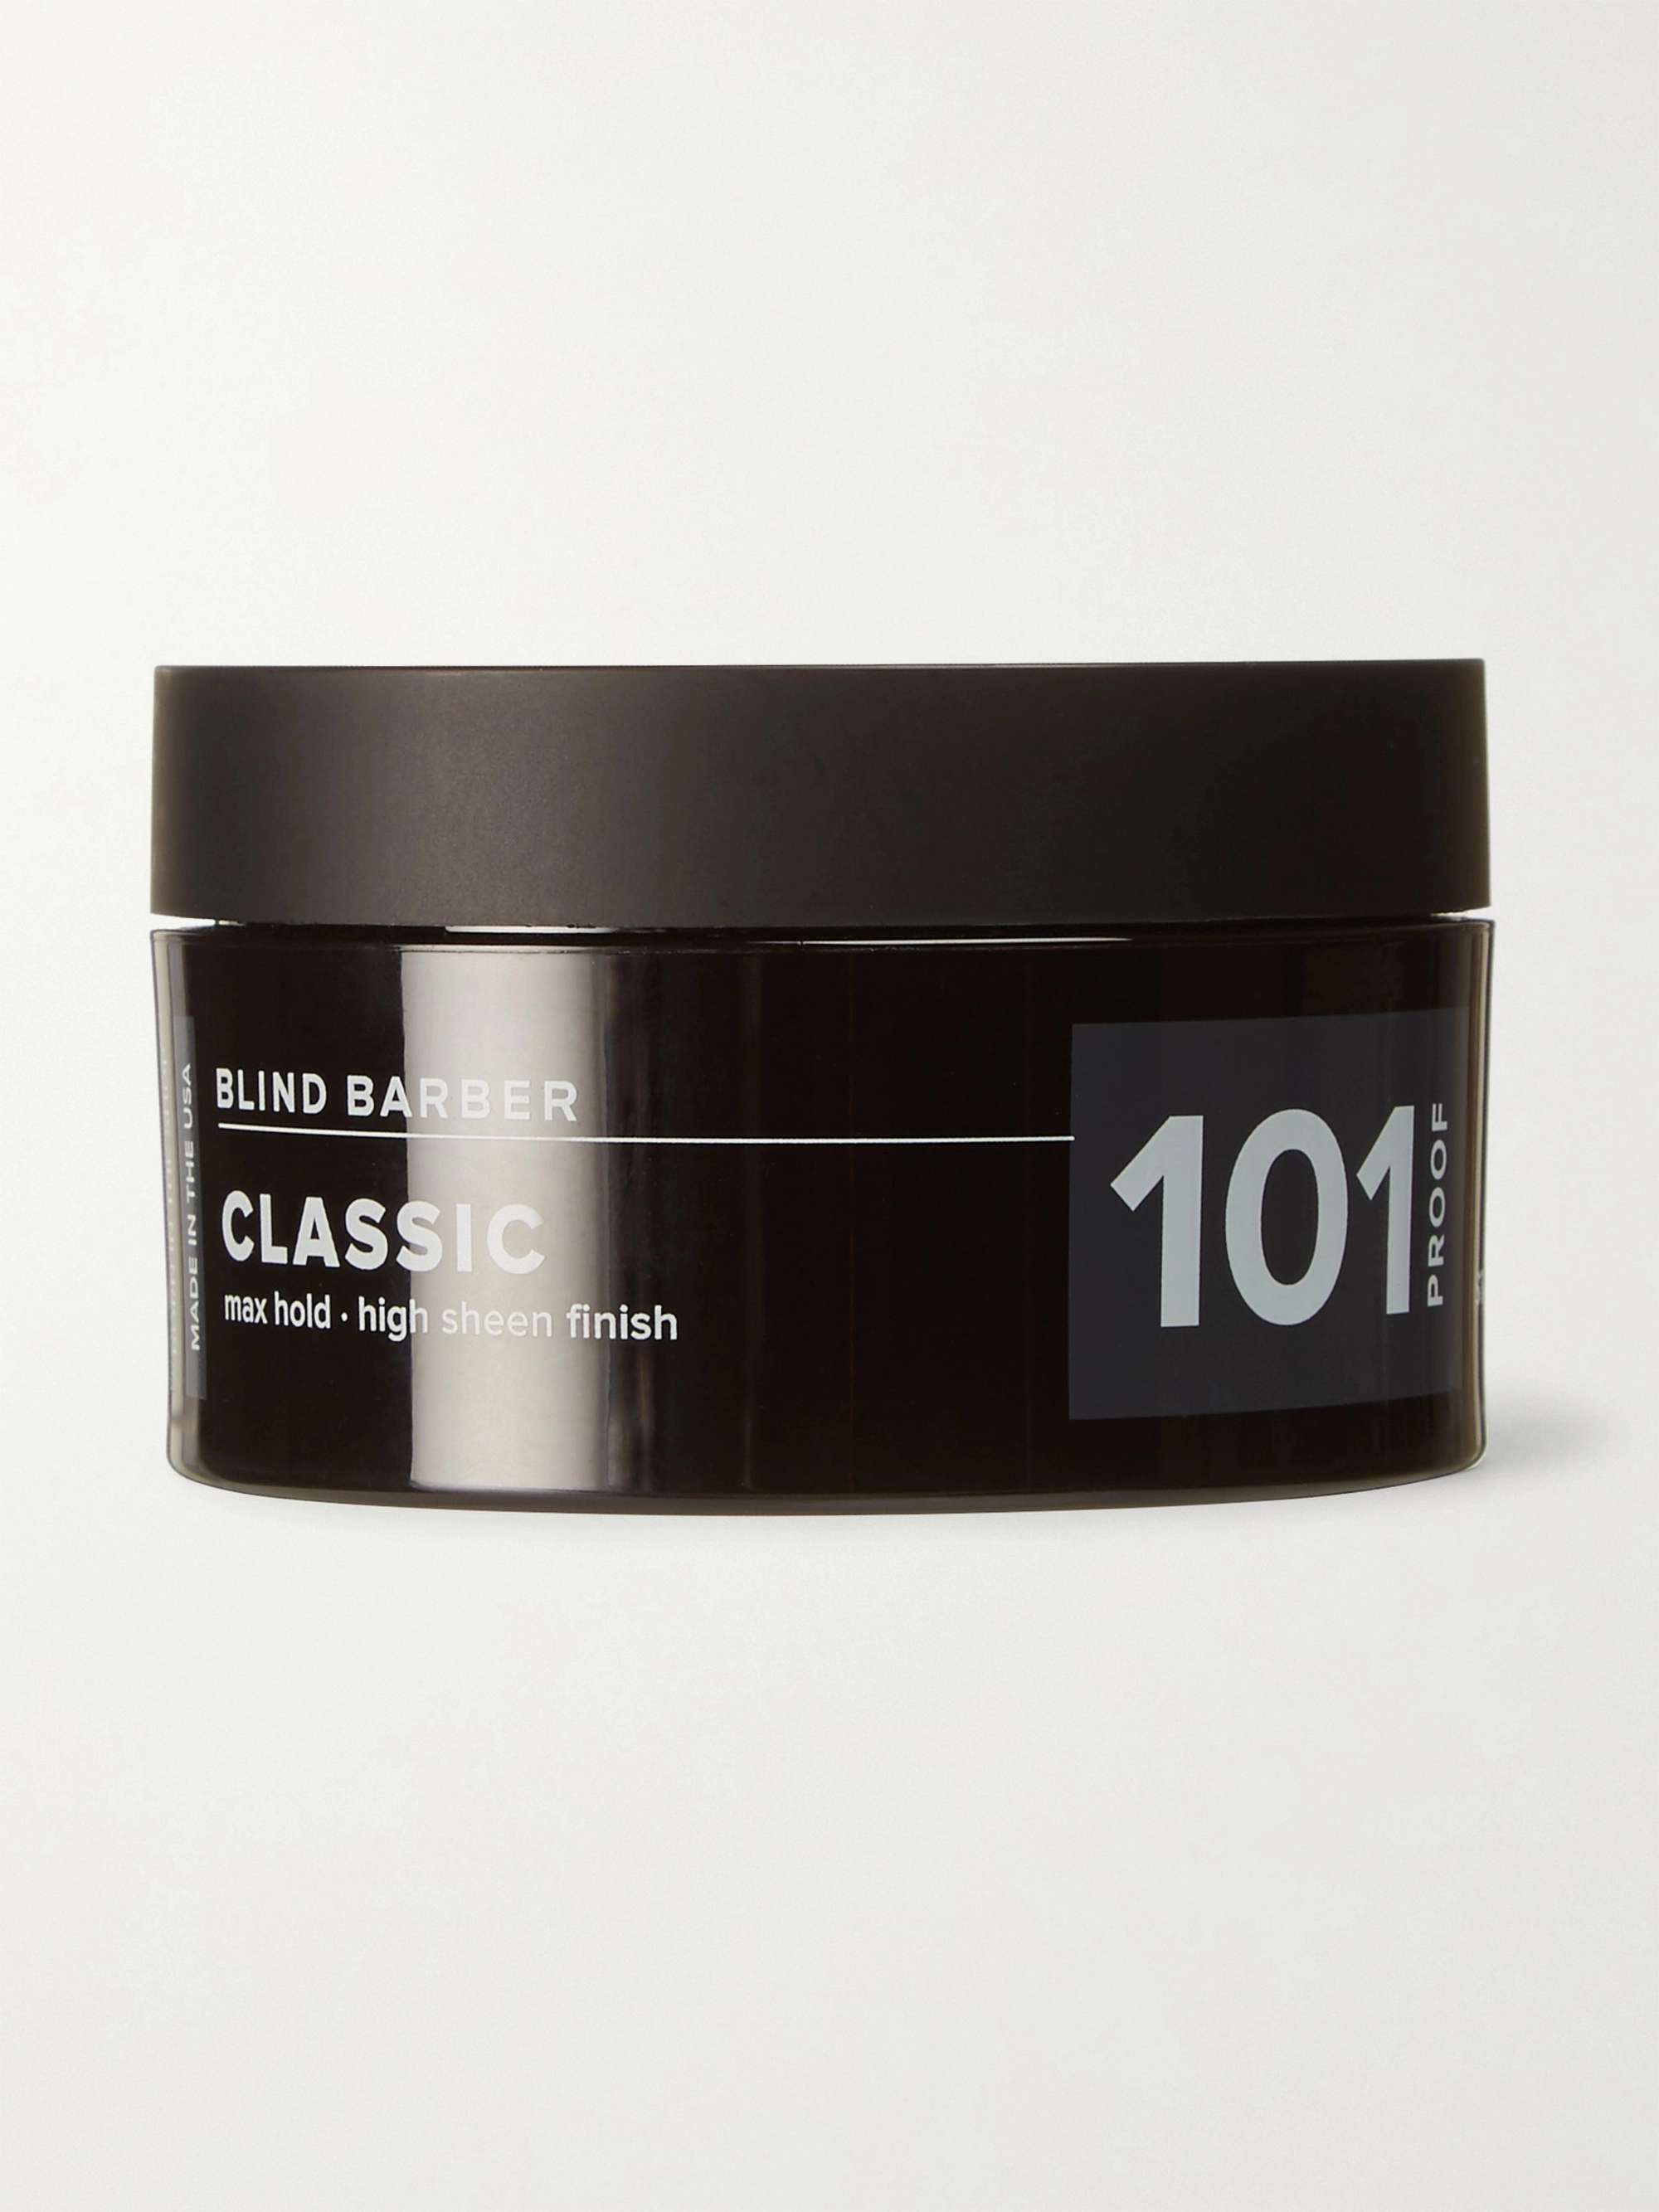 Blind Barber 101 Proof Classic Pomade, 70g